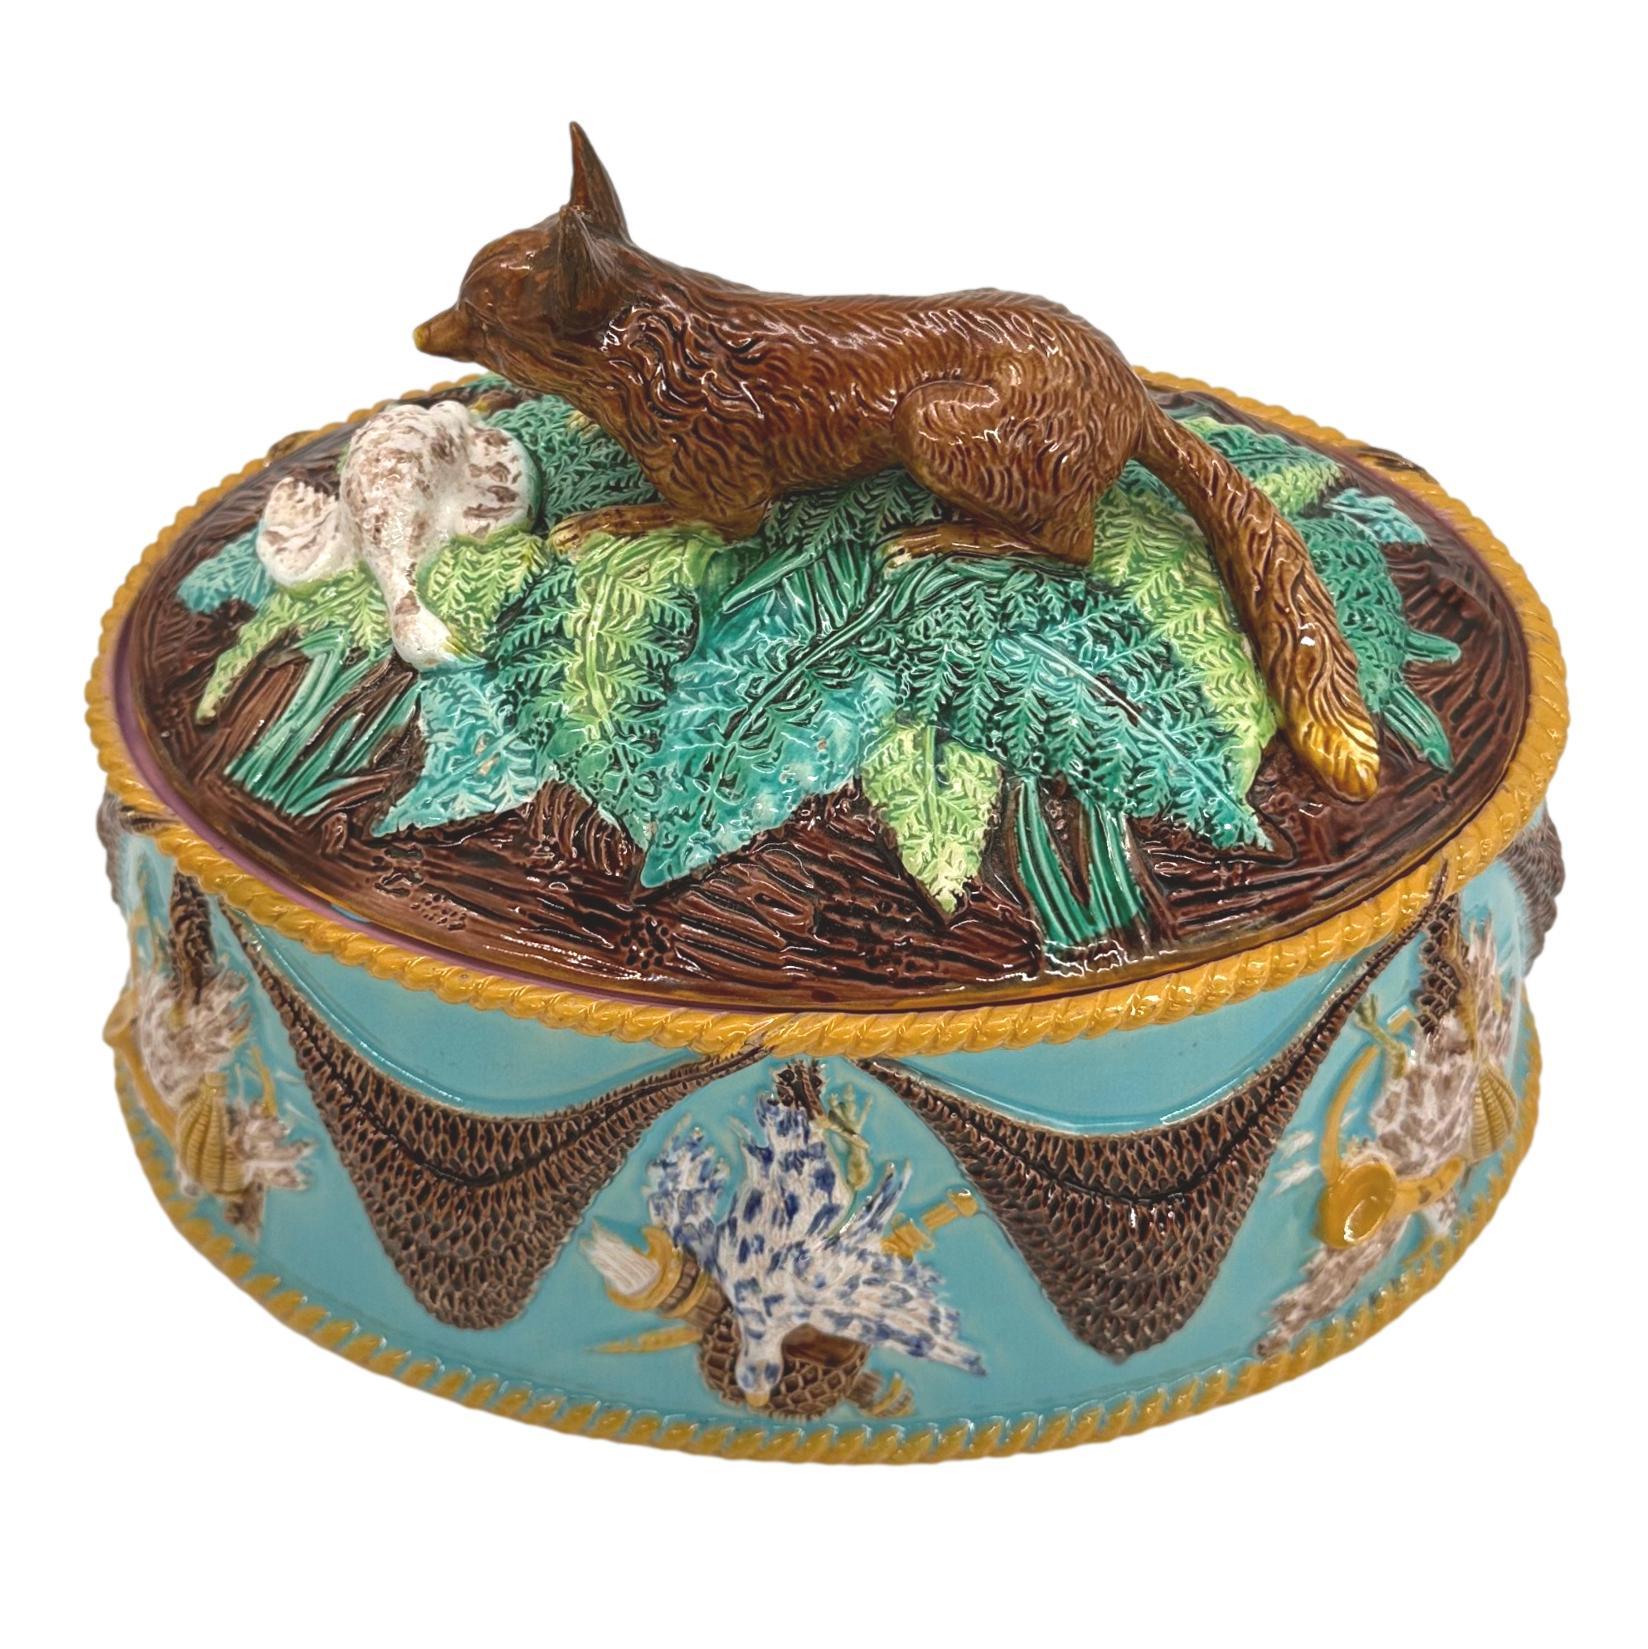 George Jones Majolica Game Tureen, of oval form, the dish with alternating relief-molded game trophies and fishing net swags, bordered in yellow glazed roping, the cover with a domed rustic mound with green glazed ferns and grasses, surmounted by a